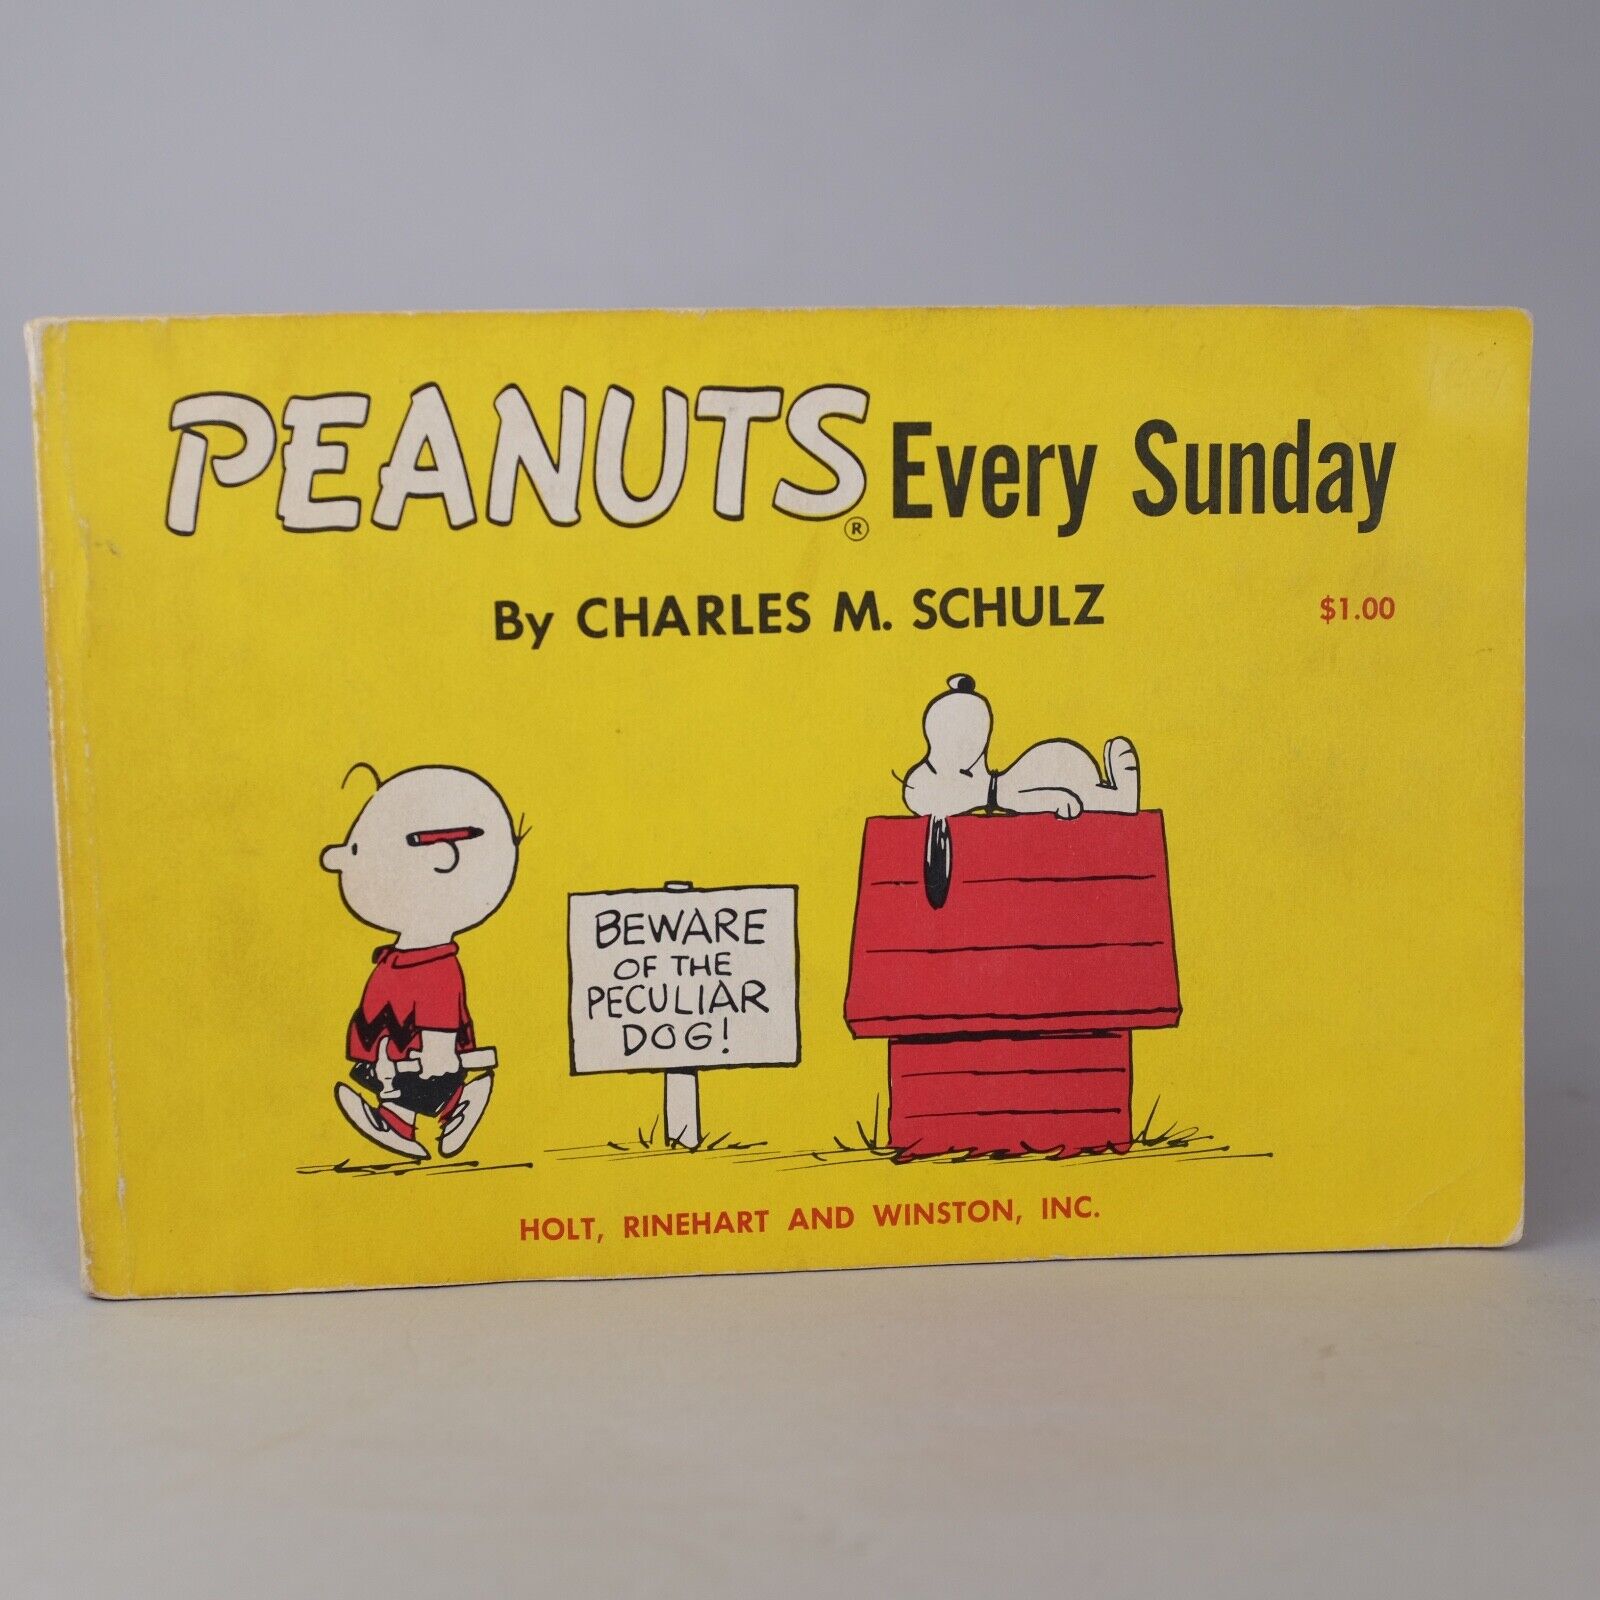 1961 PEANUTS EVERY SUNDAY Charles Schulz 1st Edition Book Snoopy Charlie Brown